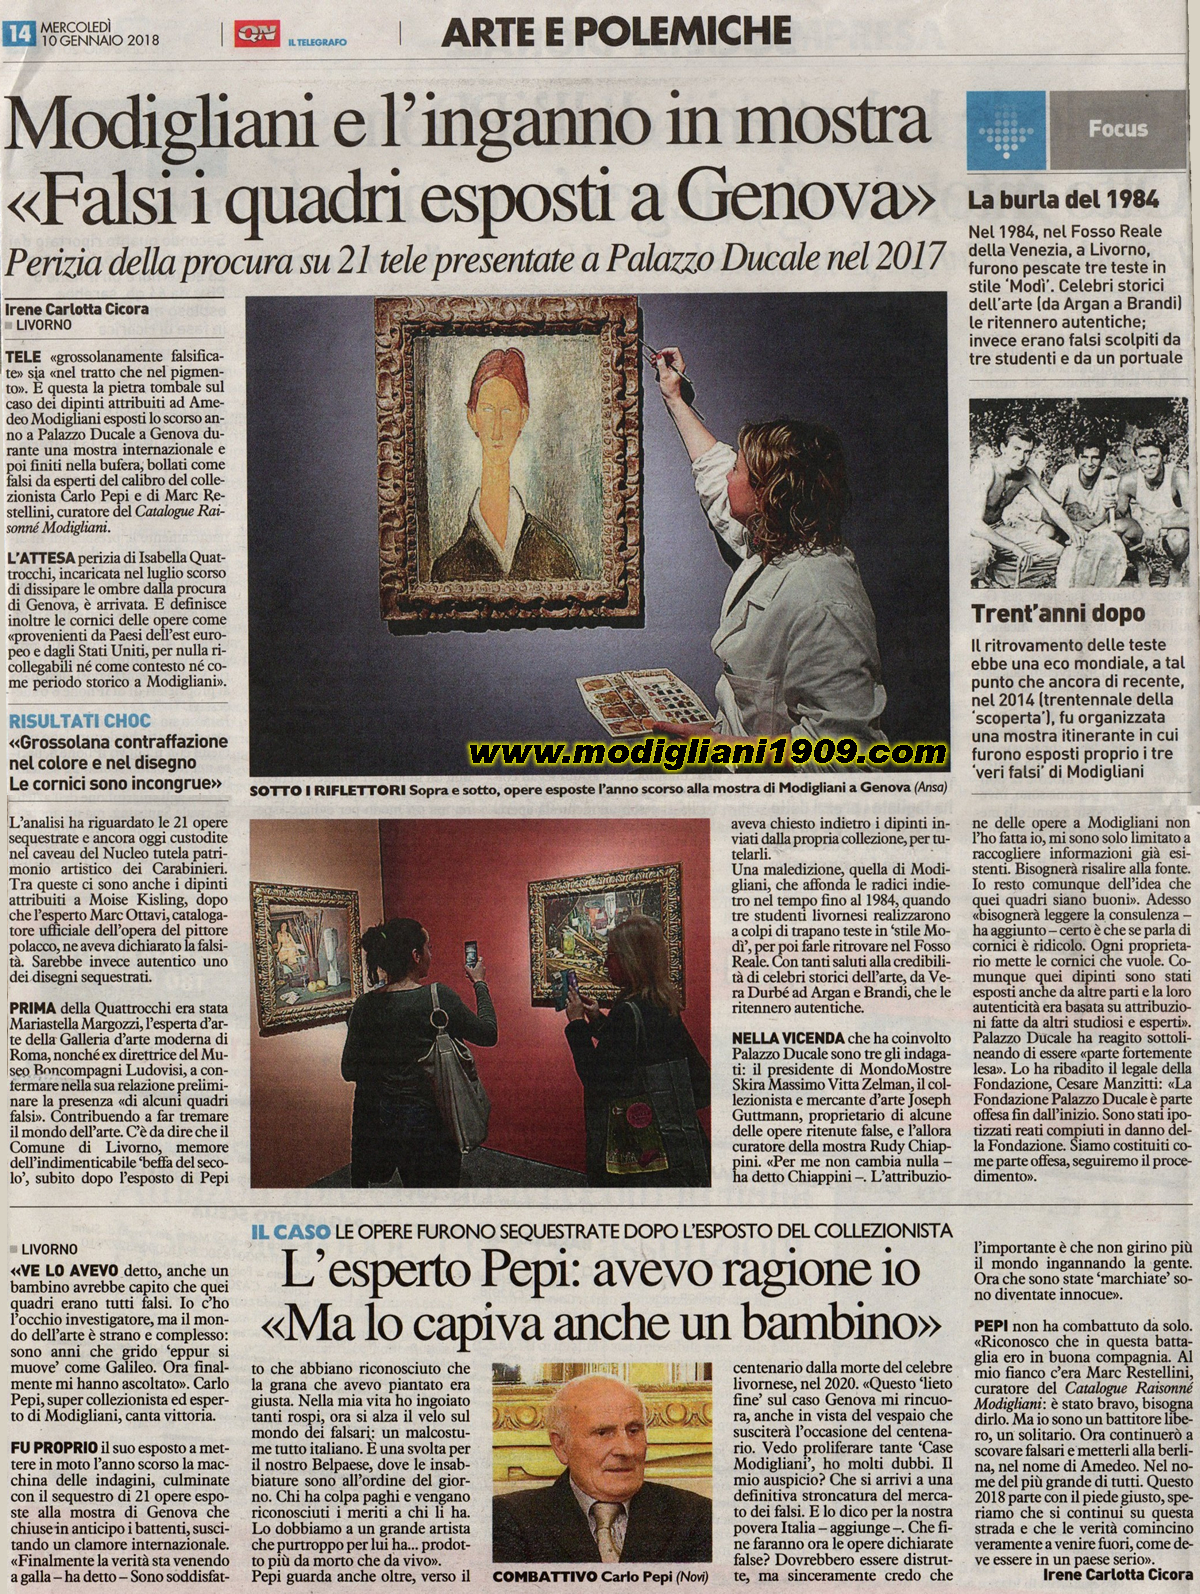 Modigliani and the deception on display 'fake paintings exposed in Genoa - Il Telegrafo